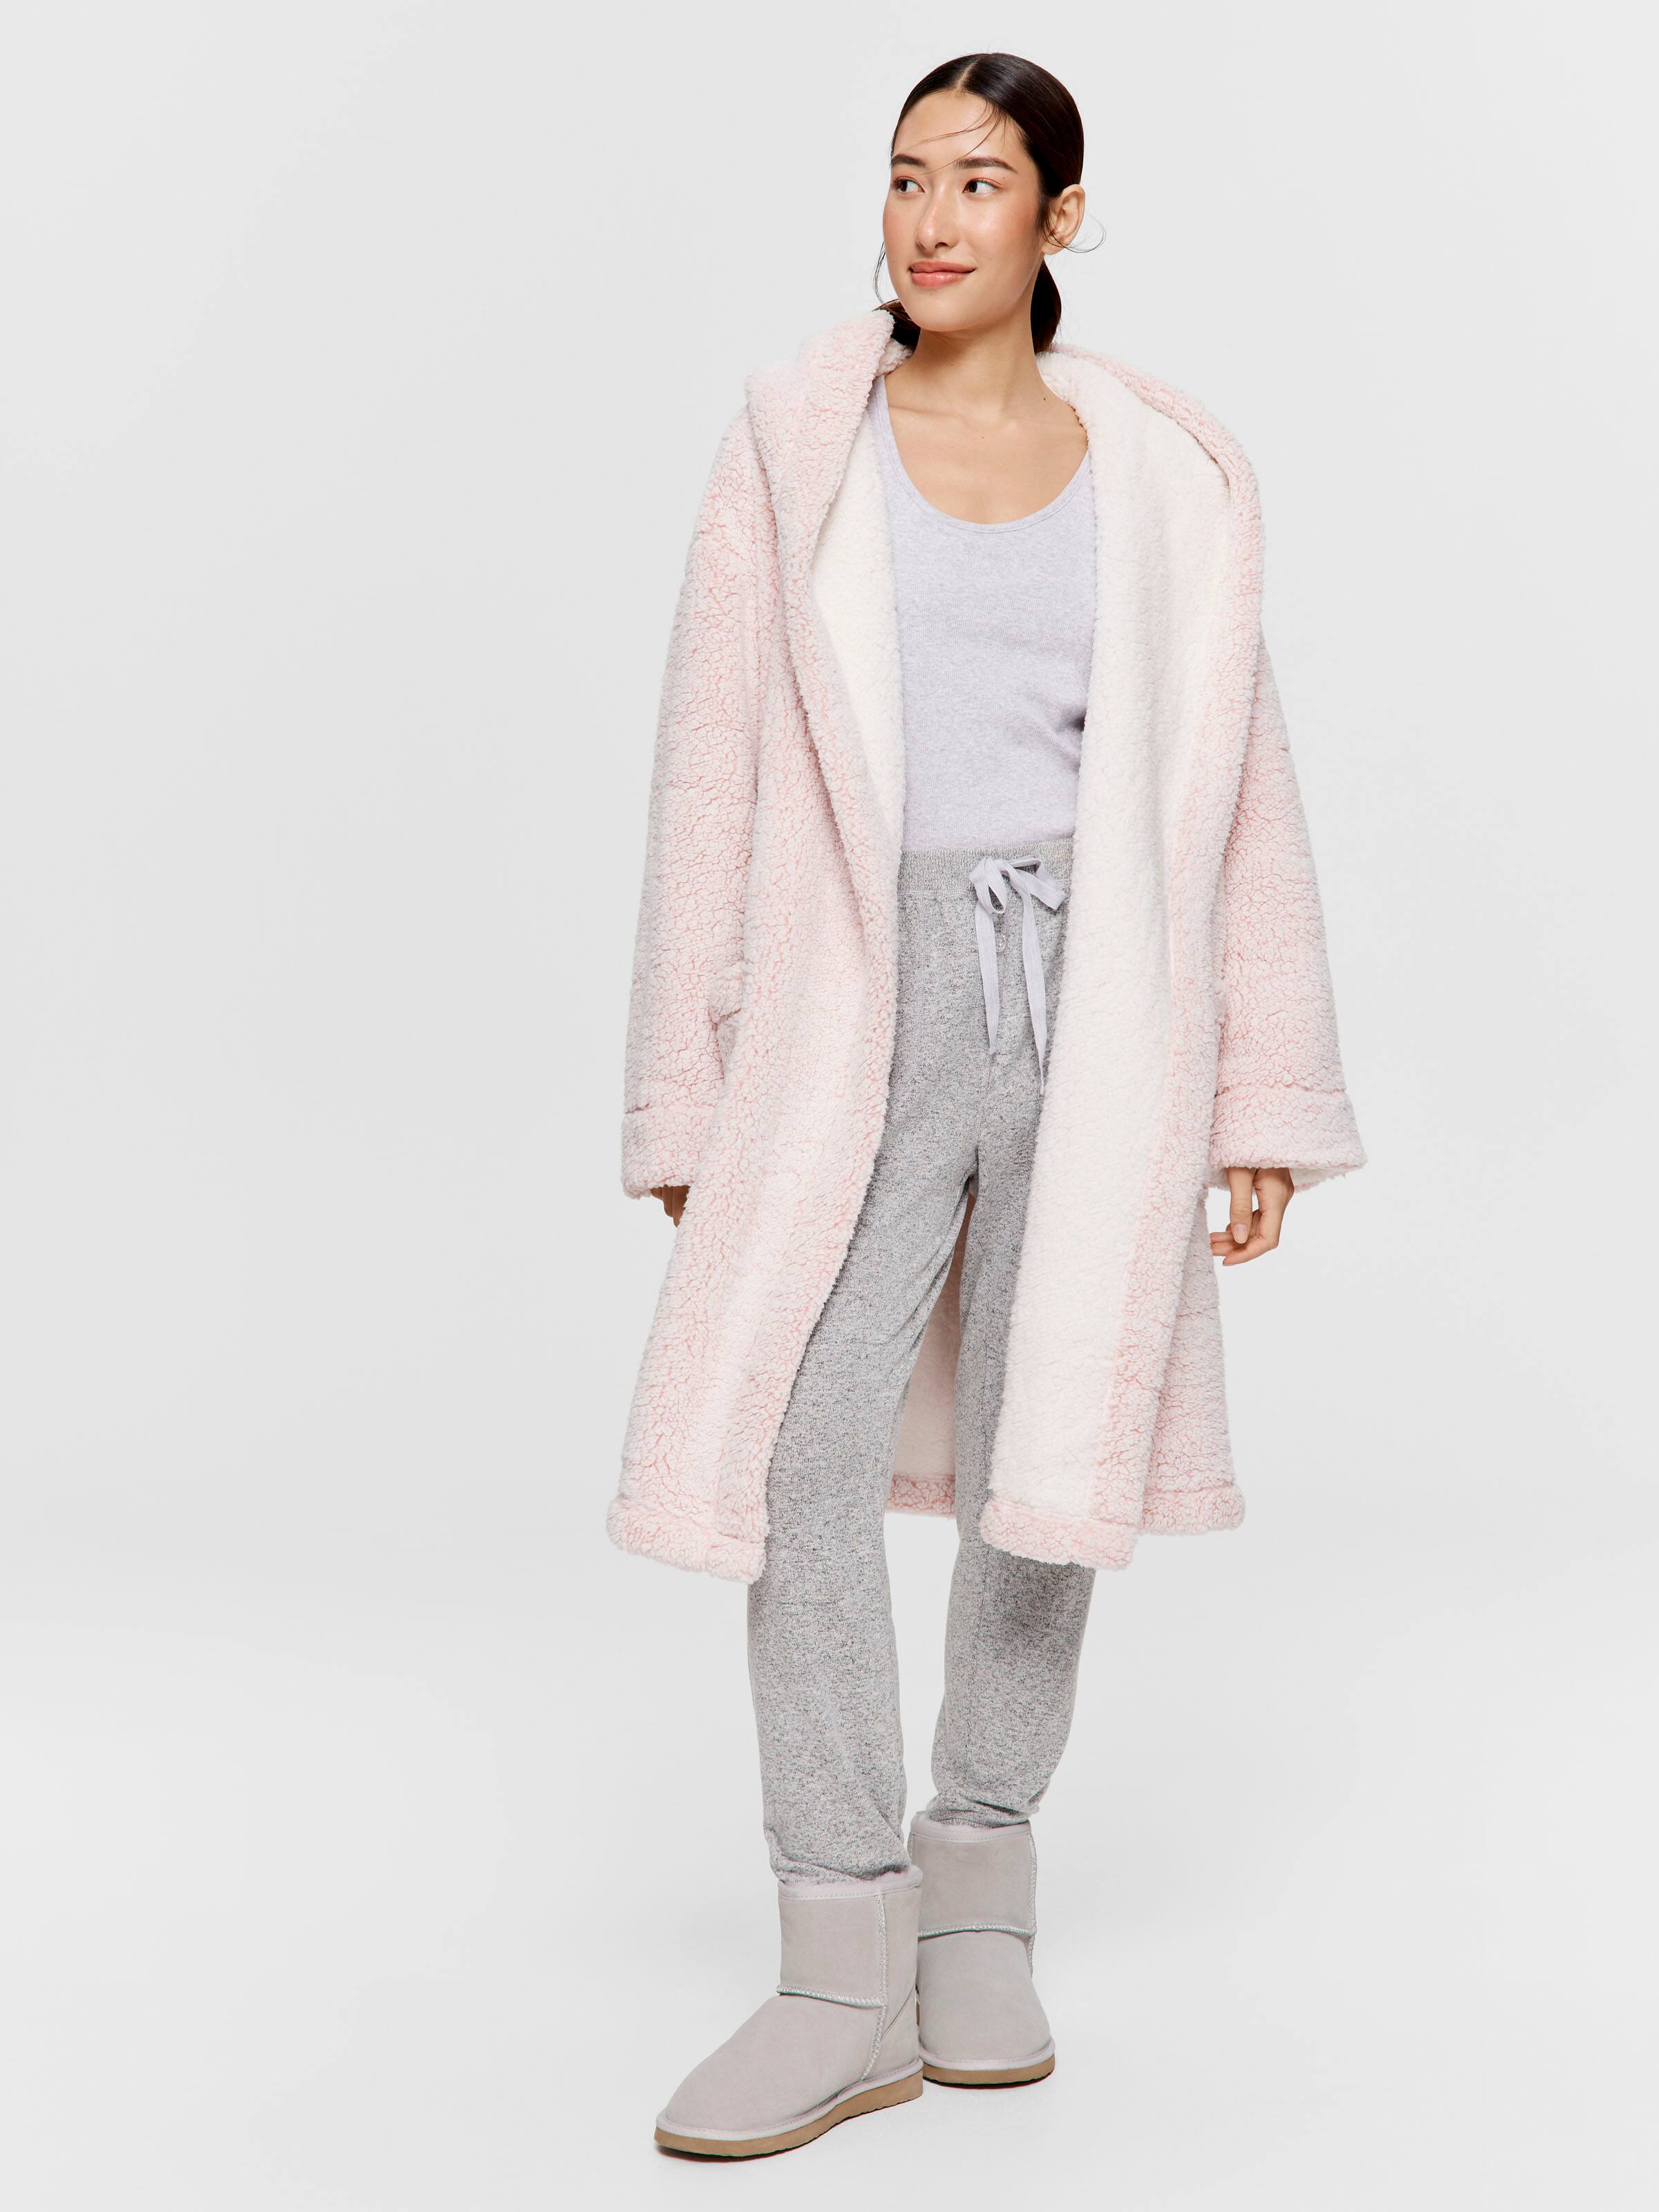 Sherpa Hooded Gown